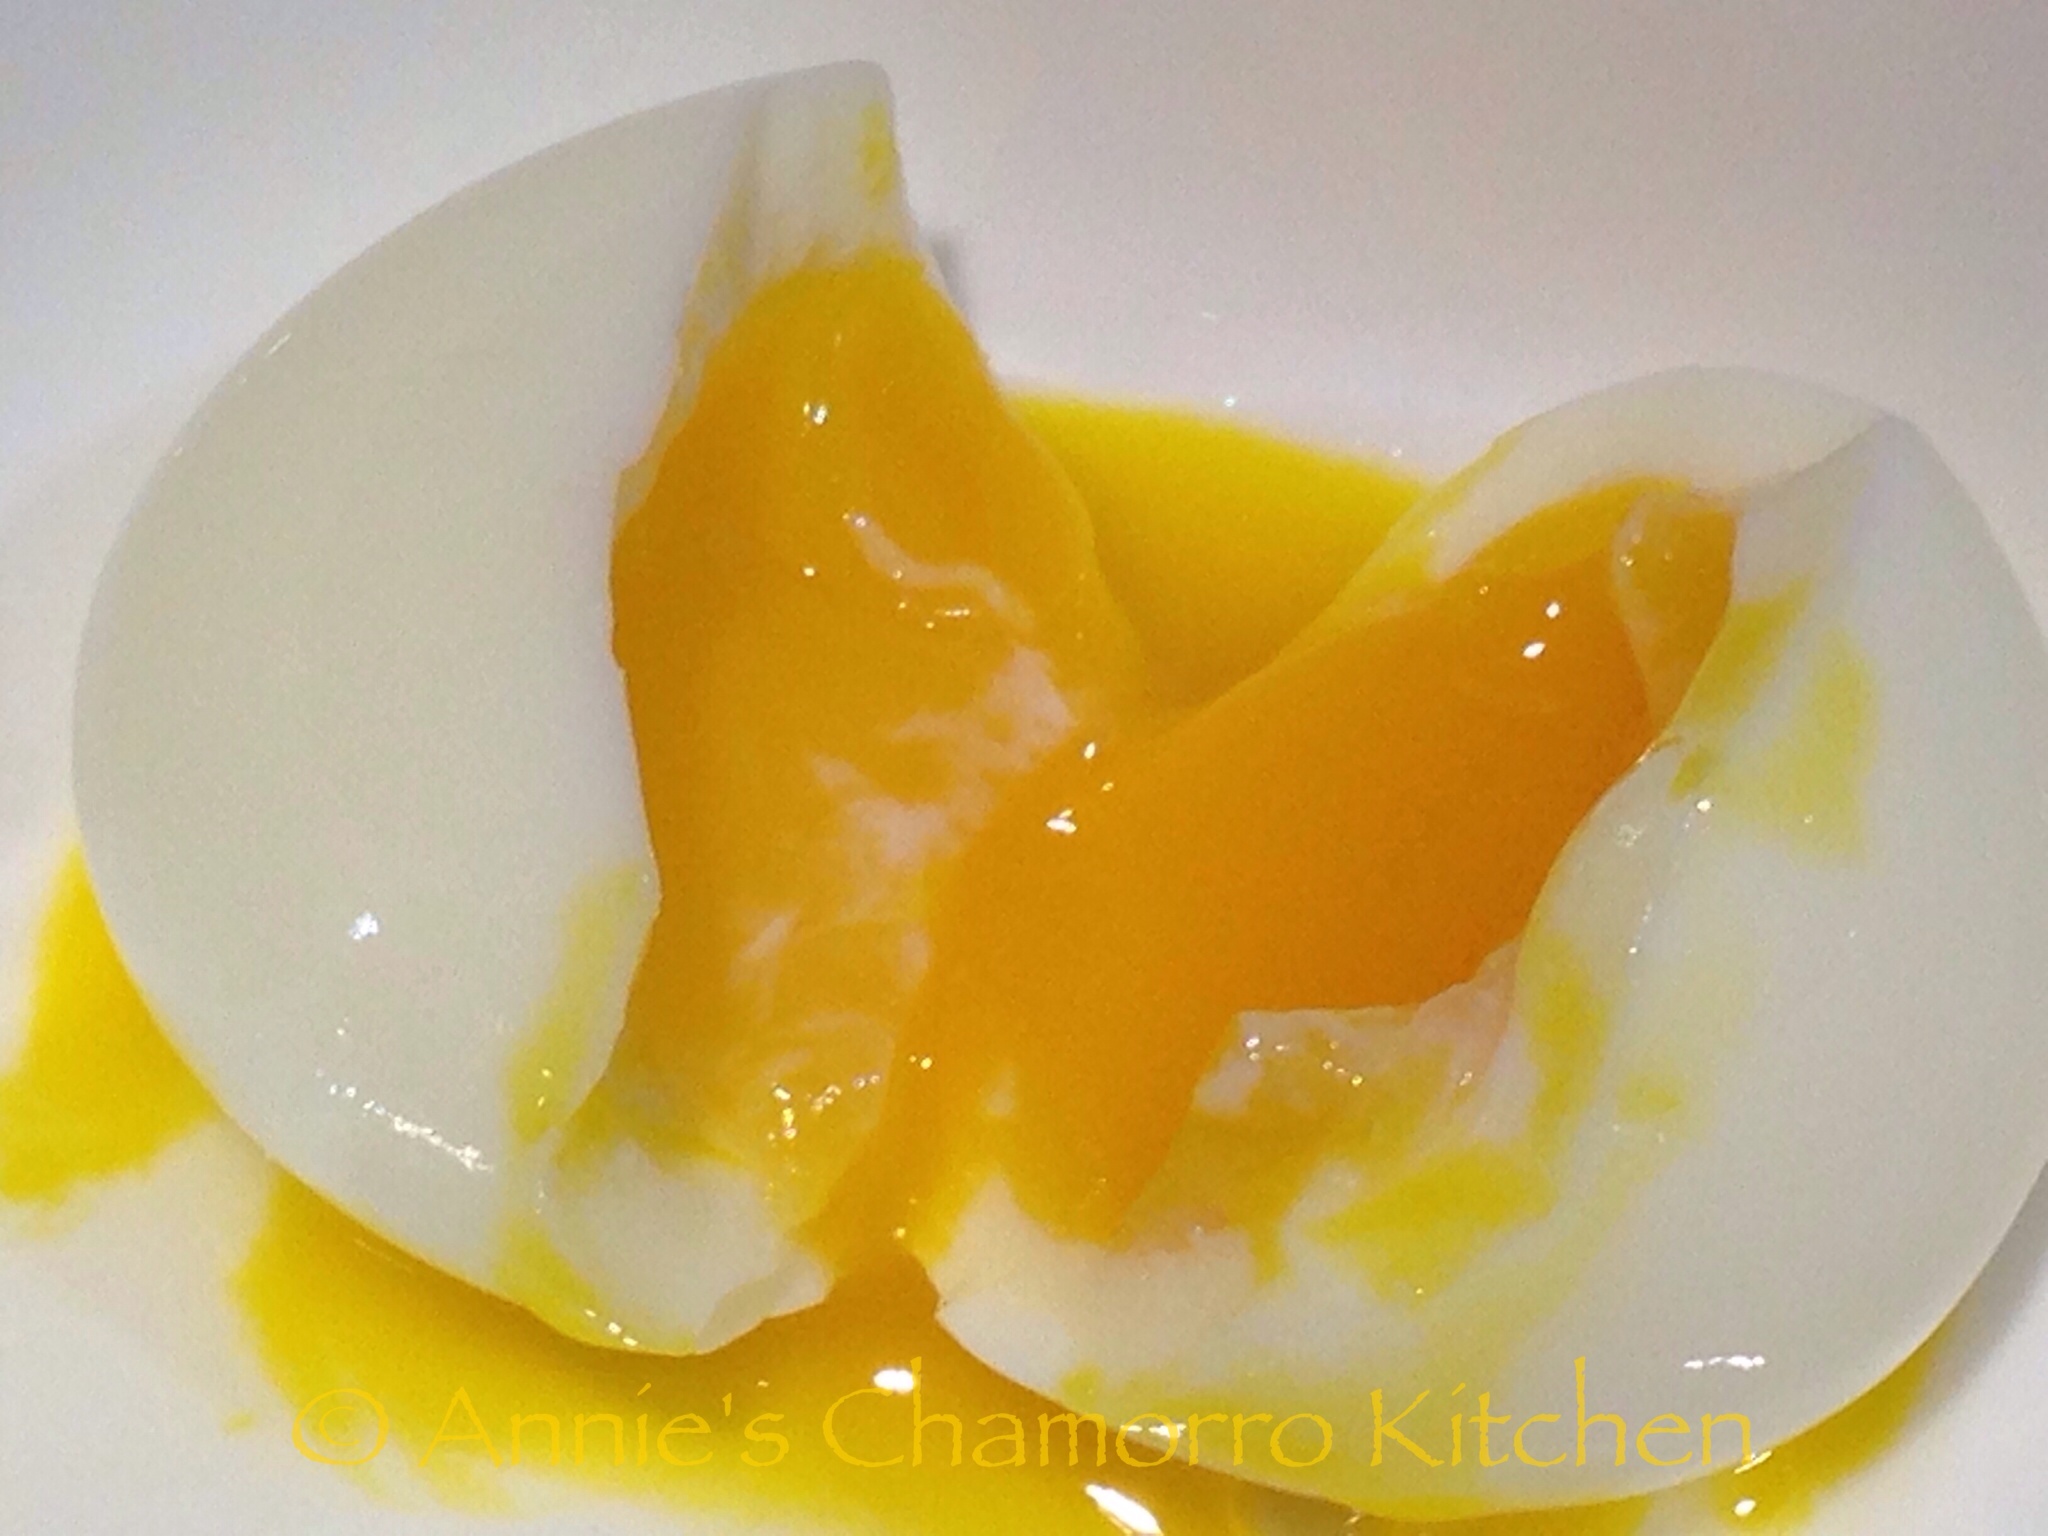 The Perfect Soft-Boiled Egg - The Noshery